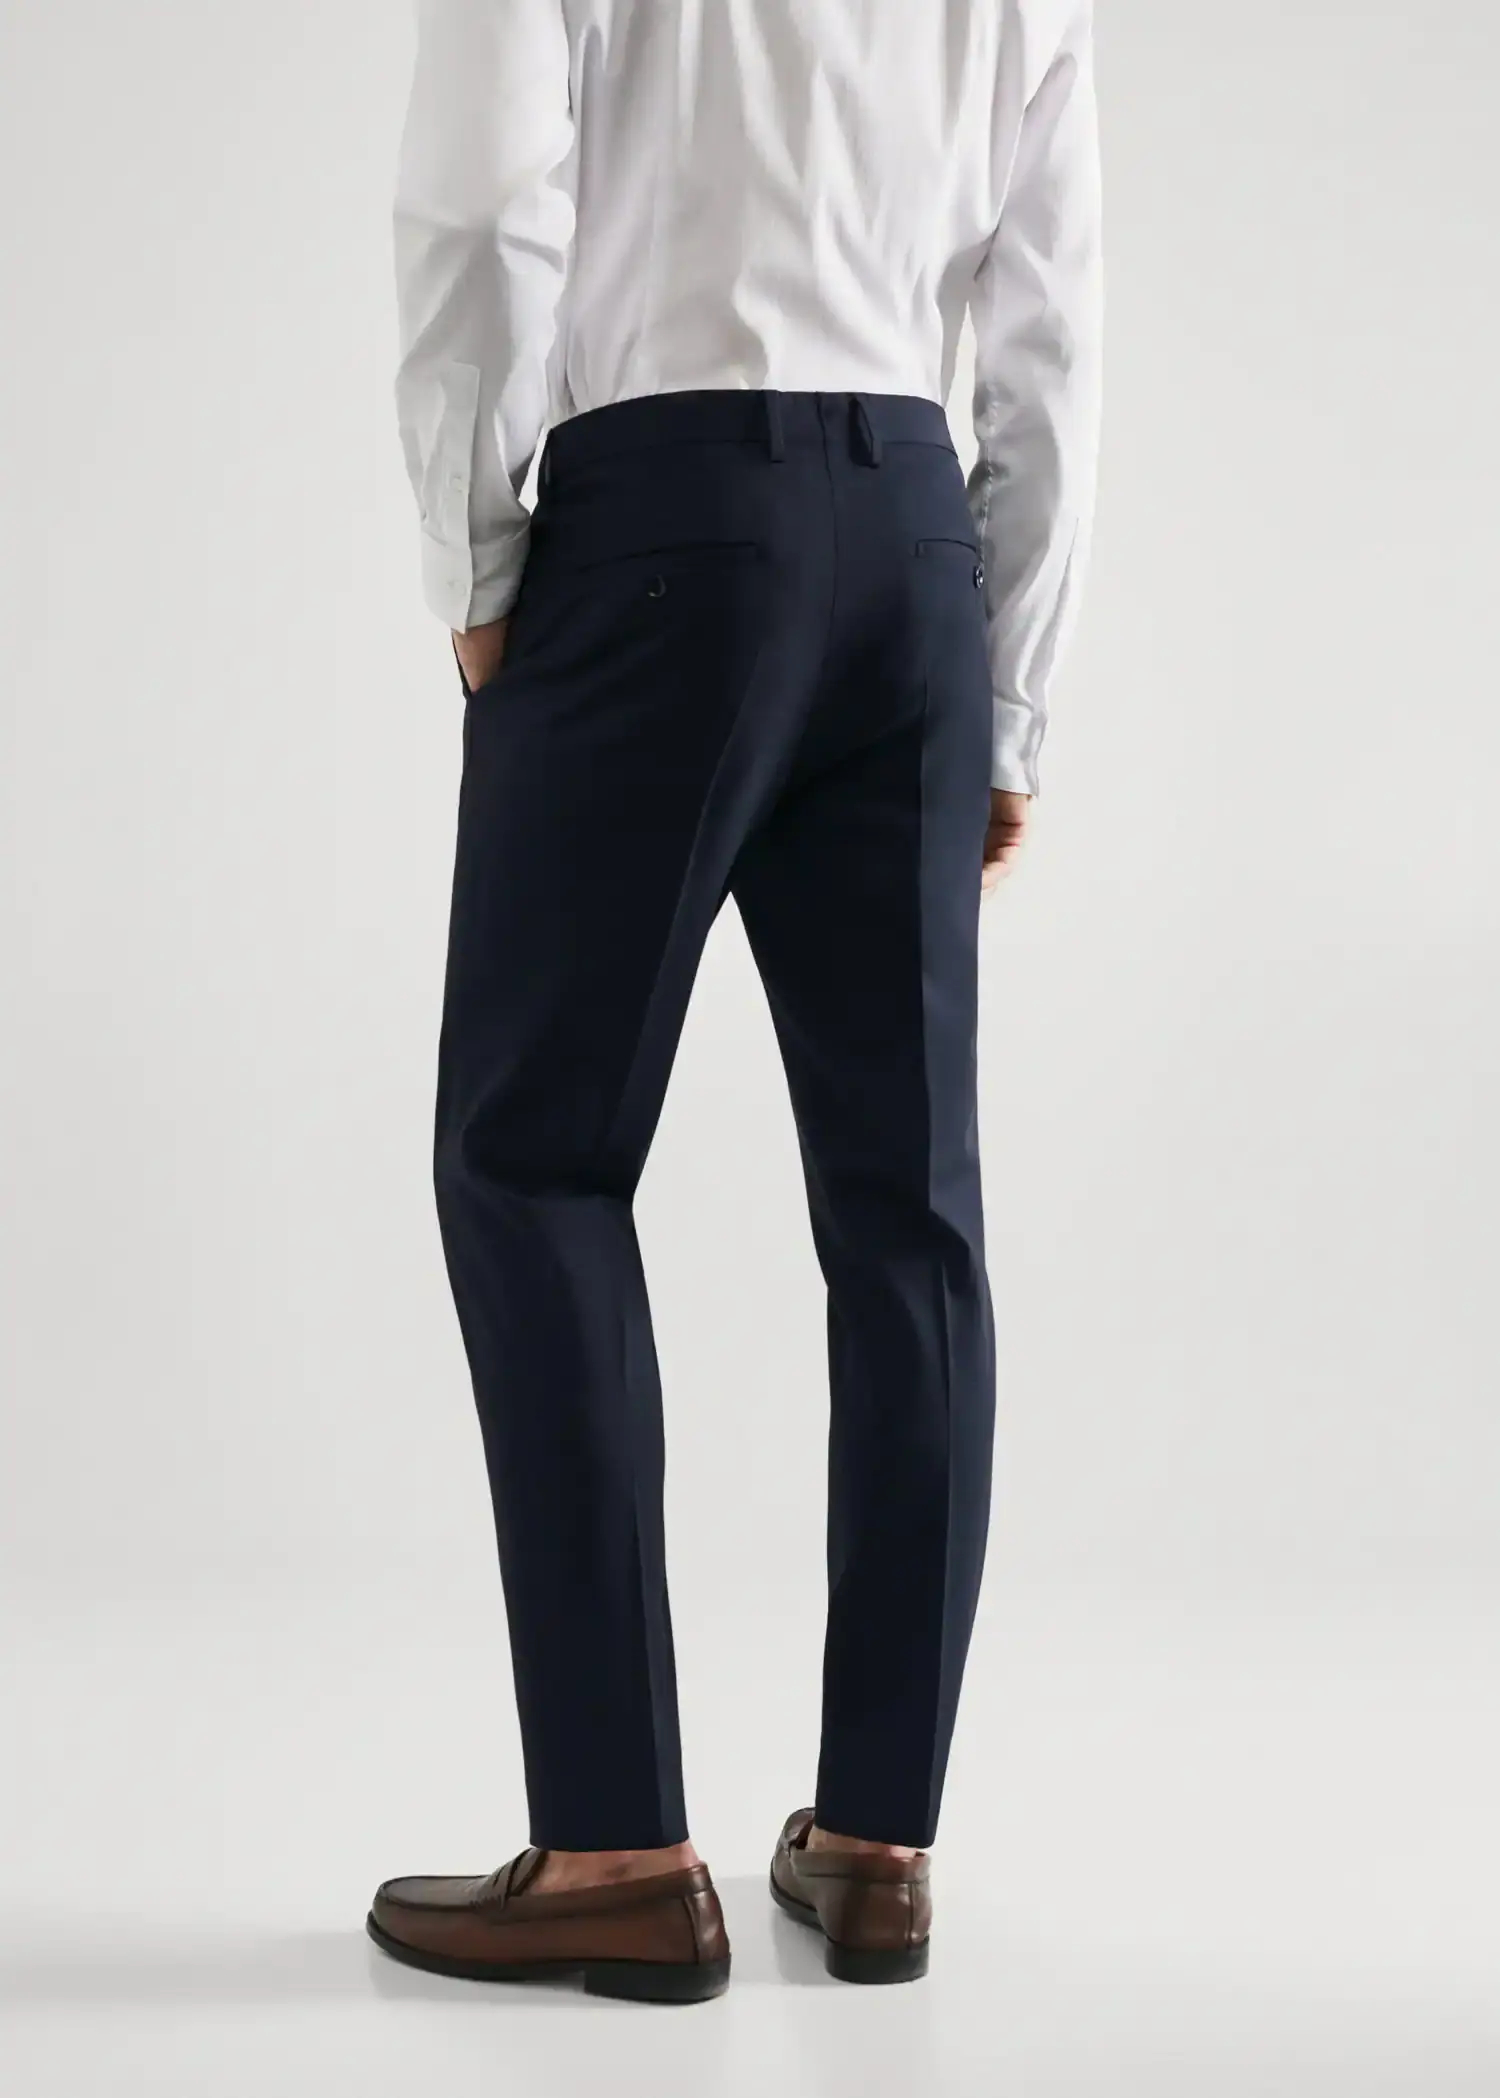 Mango Super slim fit suit trousers. a man wearing a suit and tie standing in front of a white wall. 